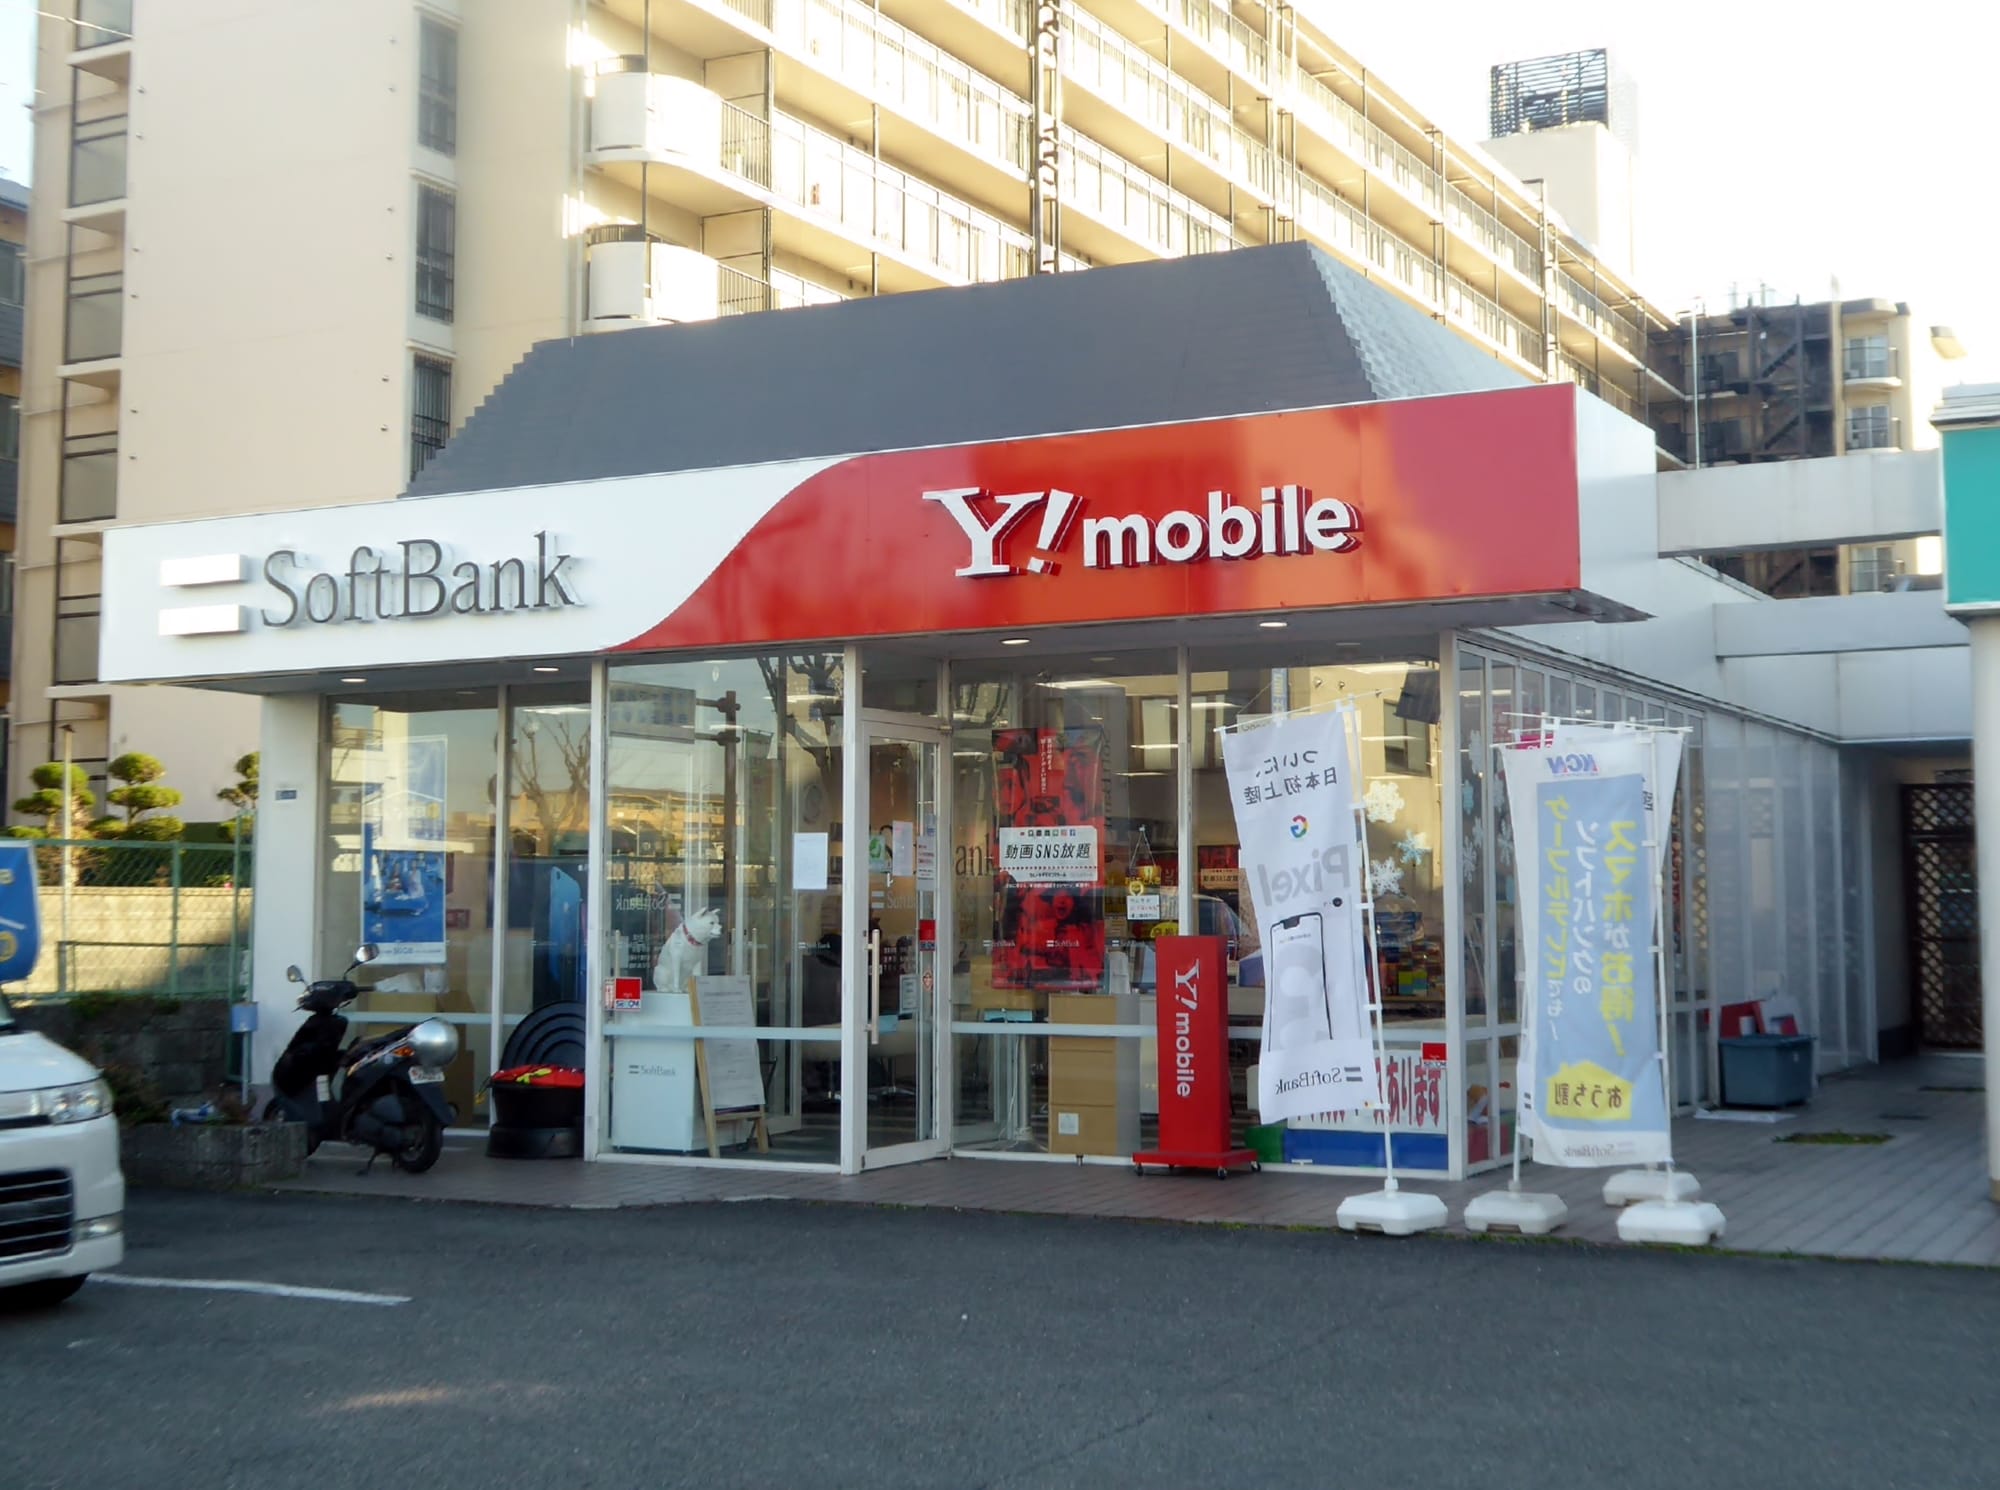 SoftBank is offering its mobile customers a free one-year subscription to Perplexity Pro